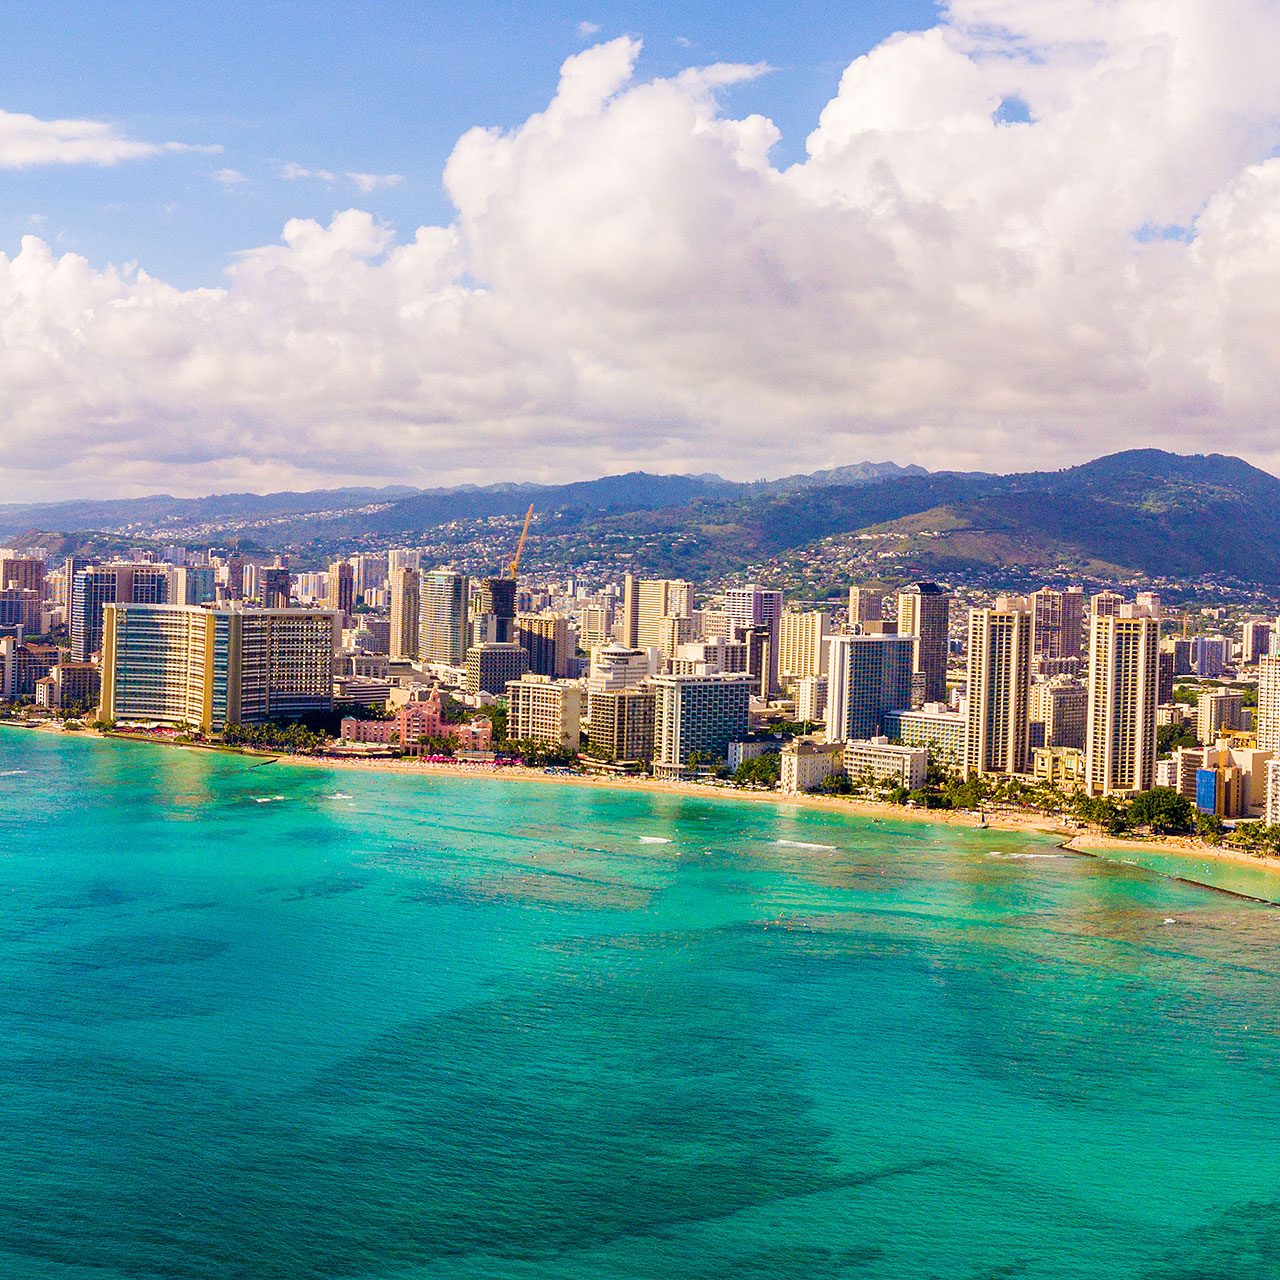 travel packages to hawaii